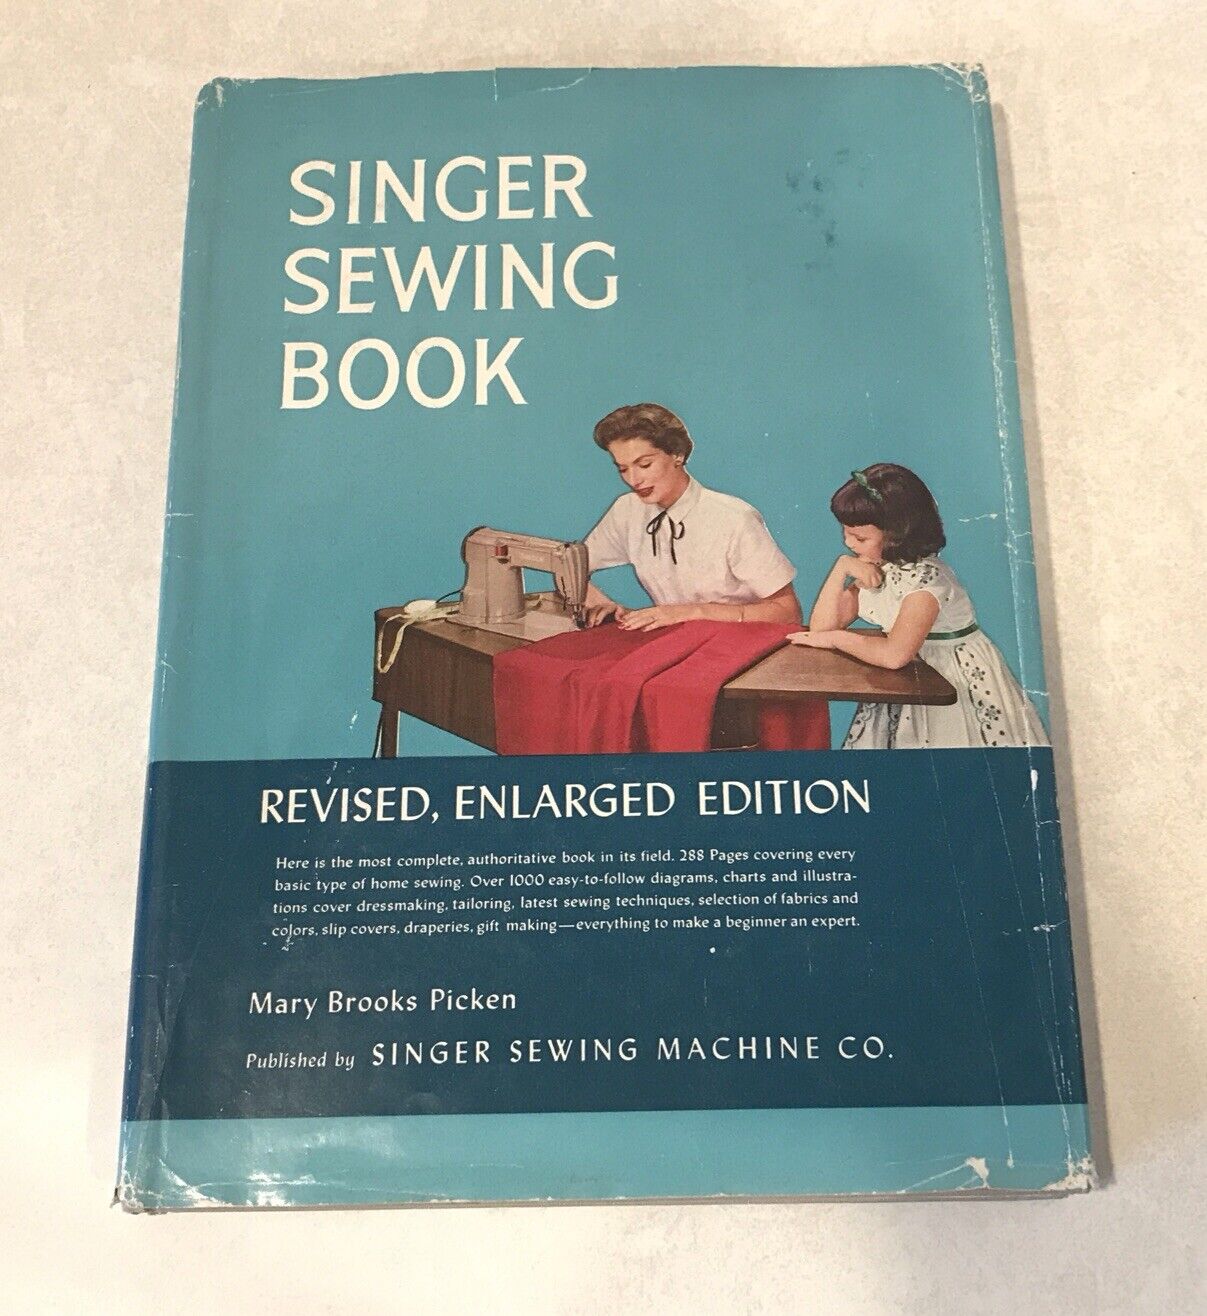 Vintage Singer Sewing Book Revised Enlarged Edition by Picken 1954 How To Illust